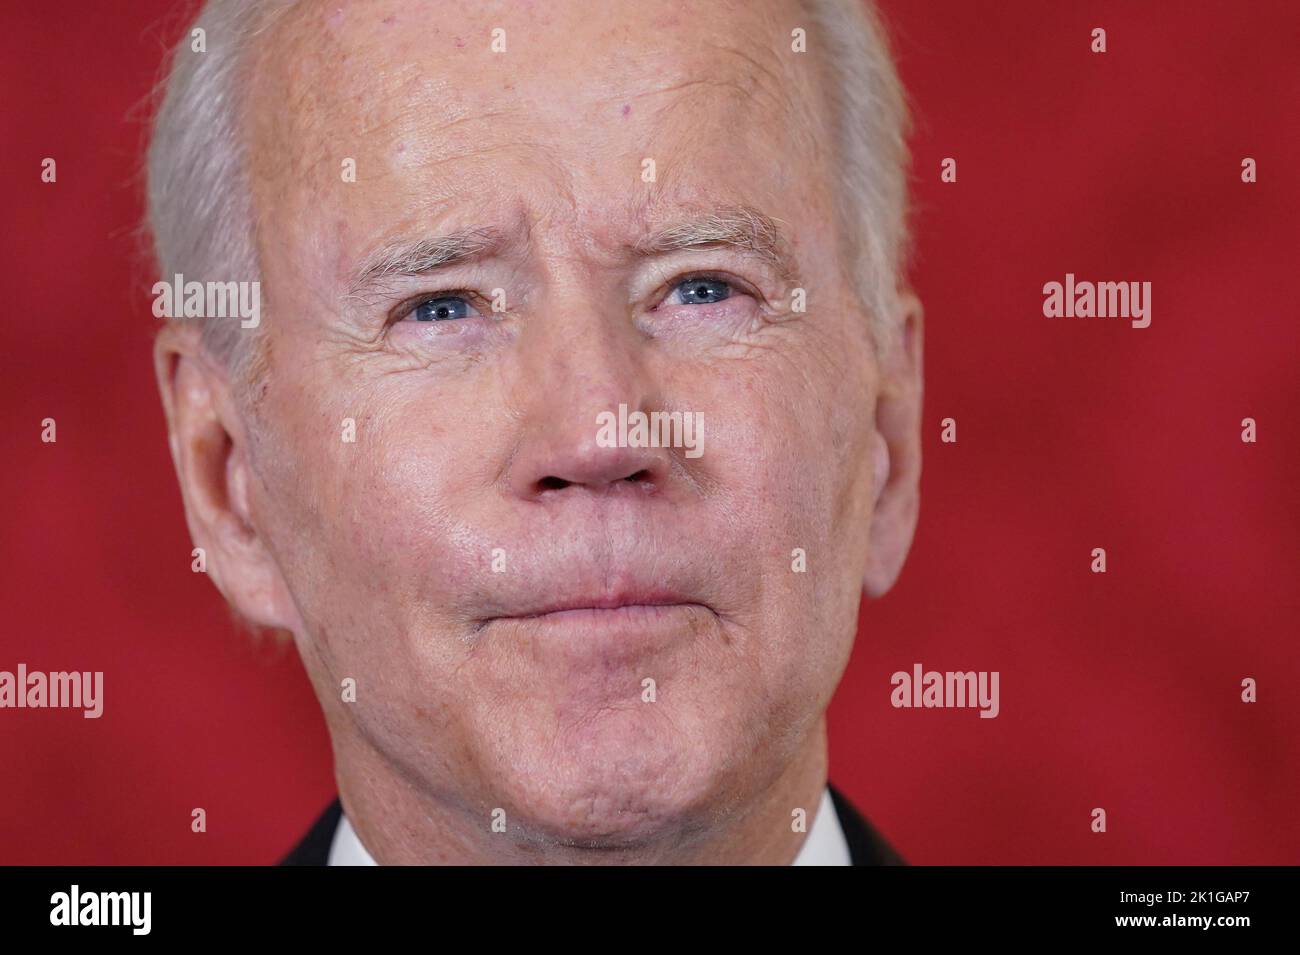 U.S. President Joe Biden speaks after signing a condolence book for Britain's Queen Elizabeth, following her death, at Lancaster House in London, Britain, September 18, 2022. REUTERS/Kevin Lamarque Stock Photo